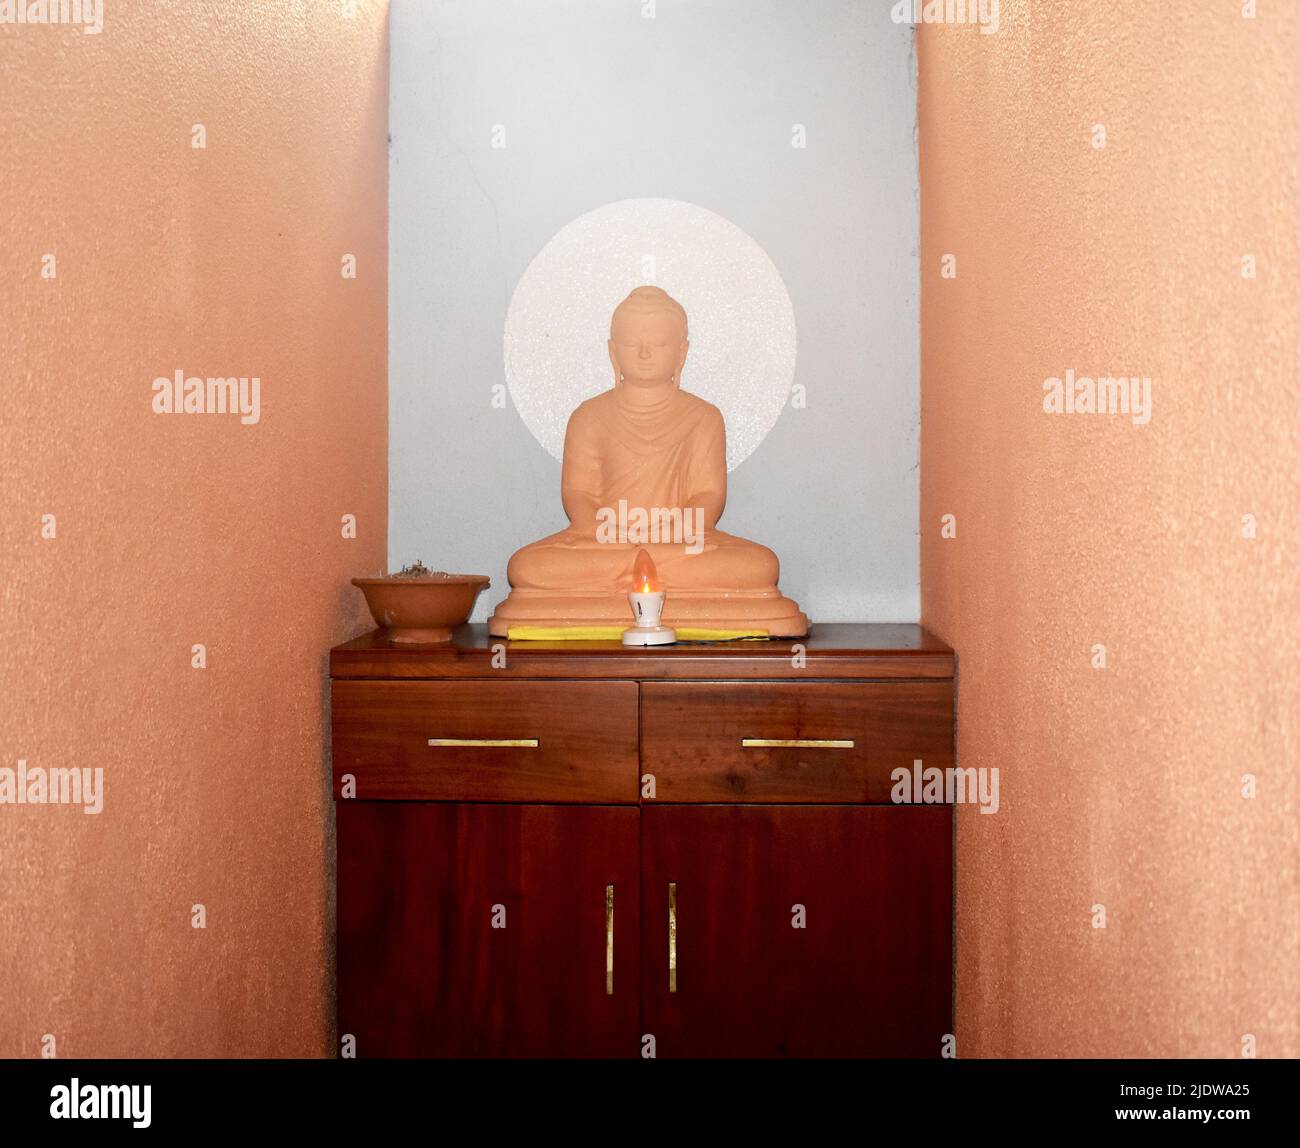 A Buddhist statue at a an Ayurveda therapy center. A remarkably simple practice and a form of healing, Ayurveda promotes a perfect harmony between mind and body. Sri Lanka's indigenous medicine has similar origins, linked to the 30,000 year old native habitants of the land known as the Balangoda man (manavaya). With its ancient history, traditional ayurveda medicine as it is practiced today in the country, is based on an indigenous heritage preserved over 3000 years. Sri Lanka. Stock Photo